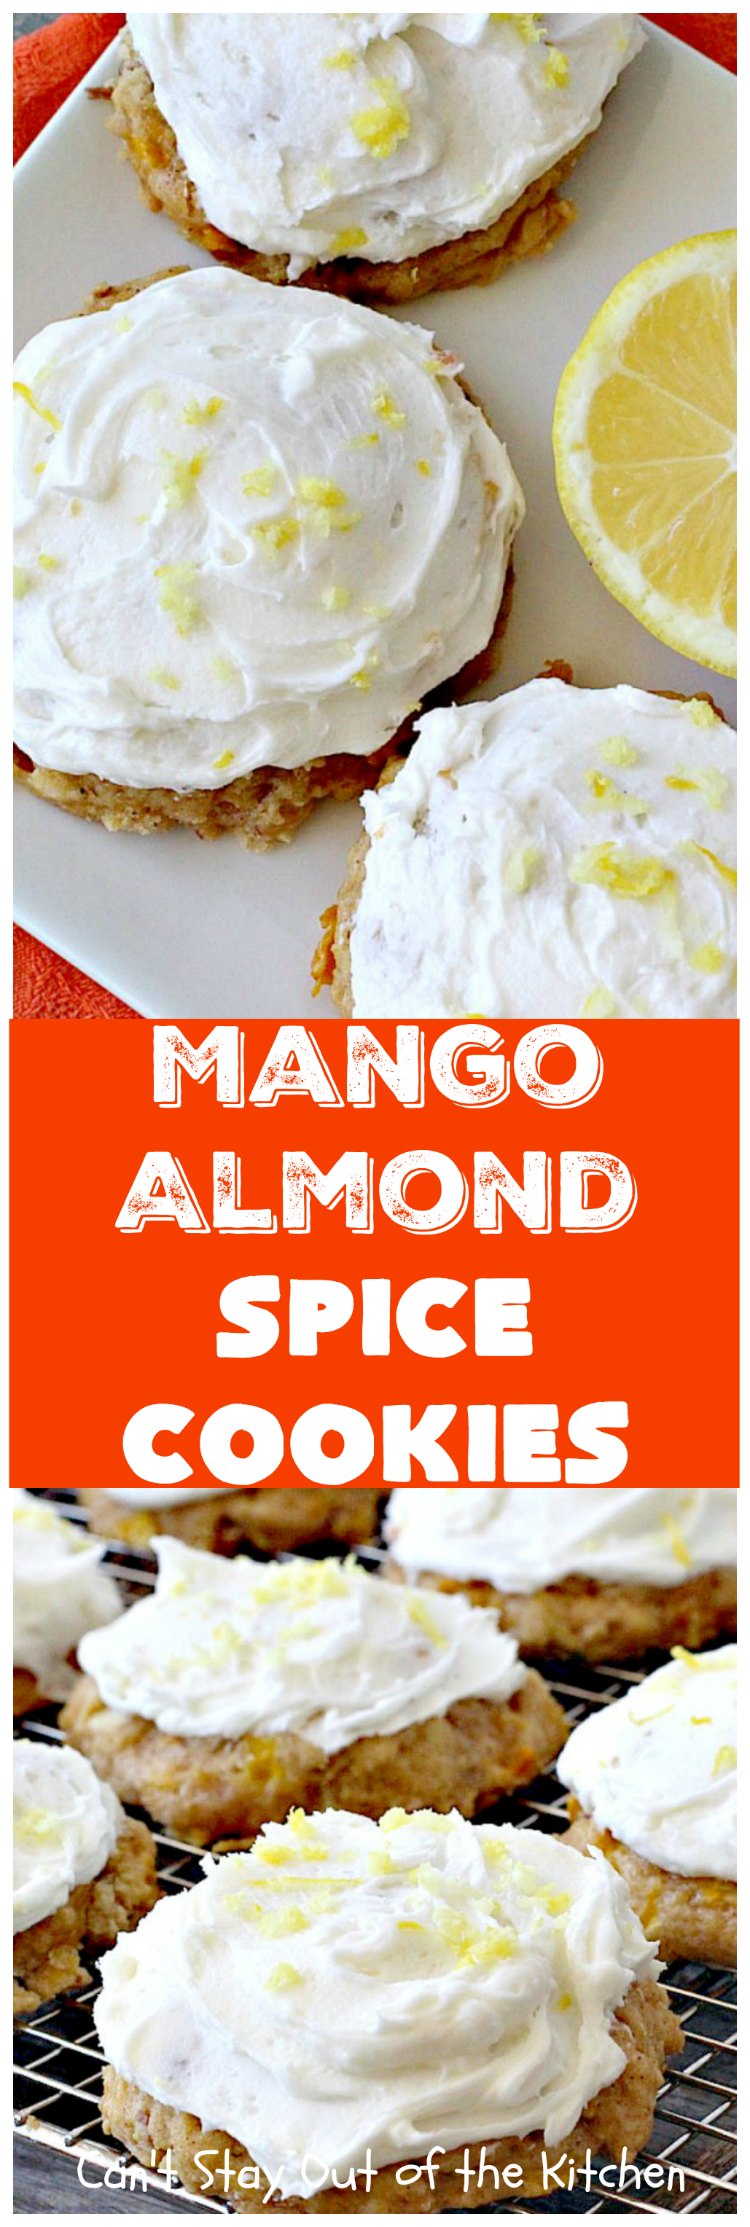 Mango Almond Spice Cookies | Can't Stay Out of the KitchenMango Almond Spice Cookies | Can't Stay Out of the Kitchen